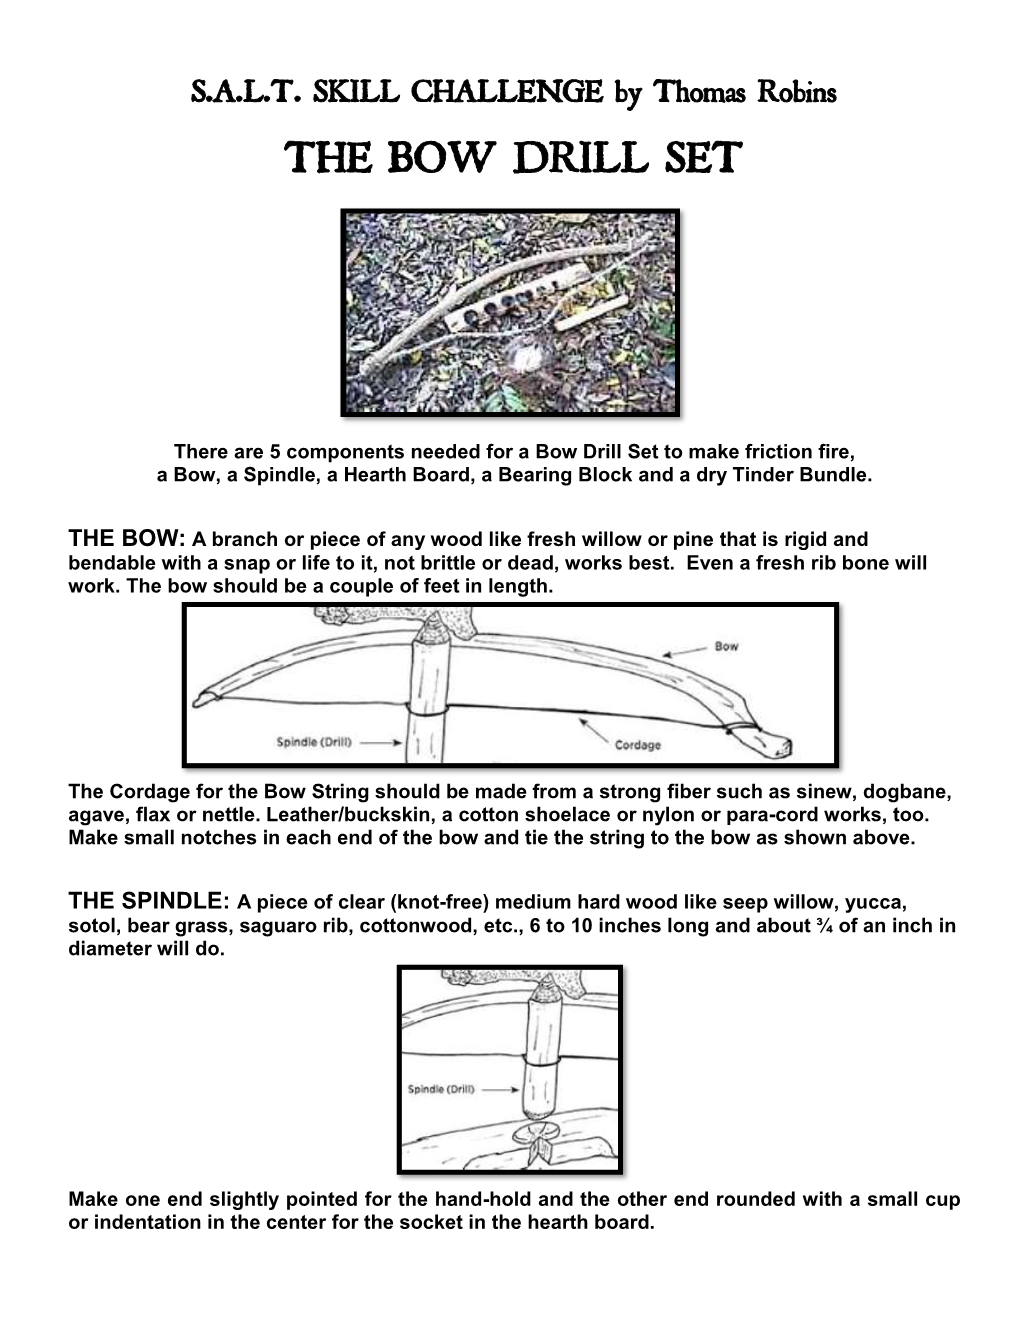 The Bow Drill Set